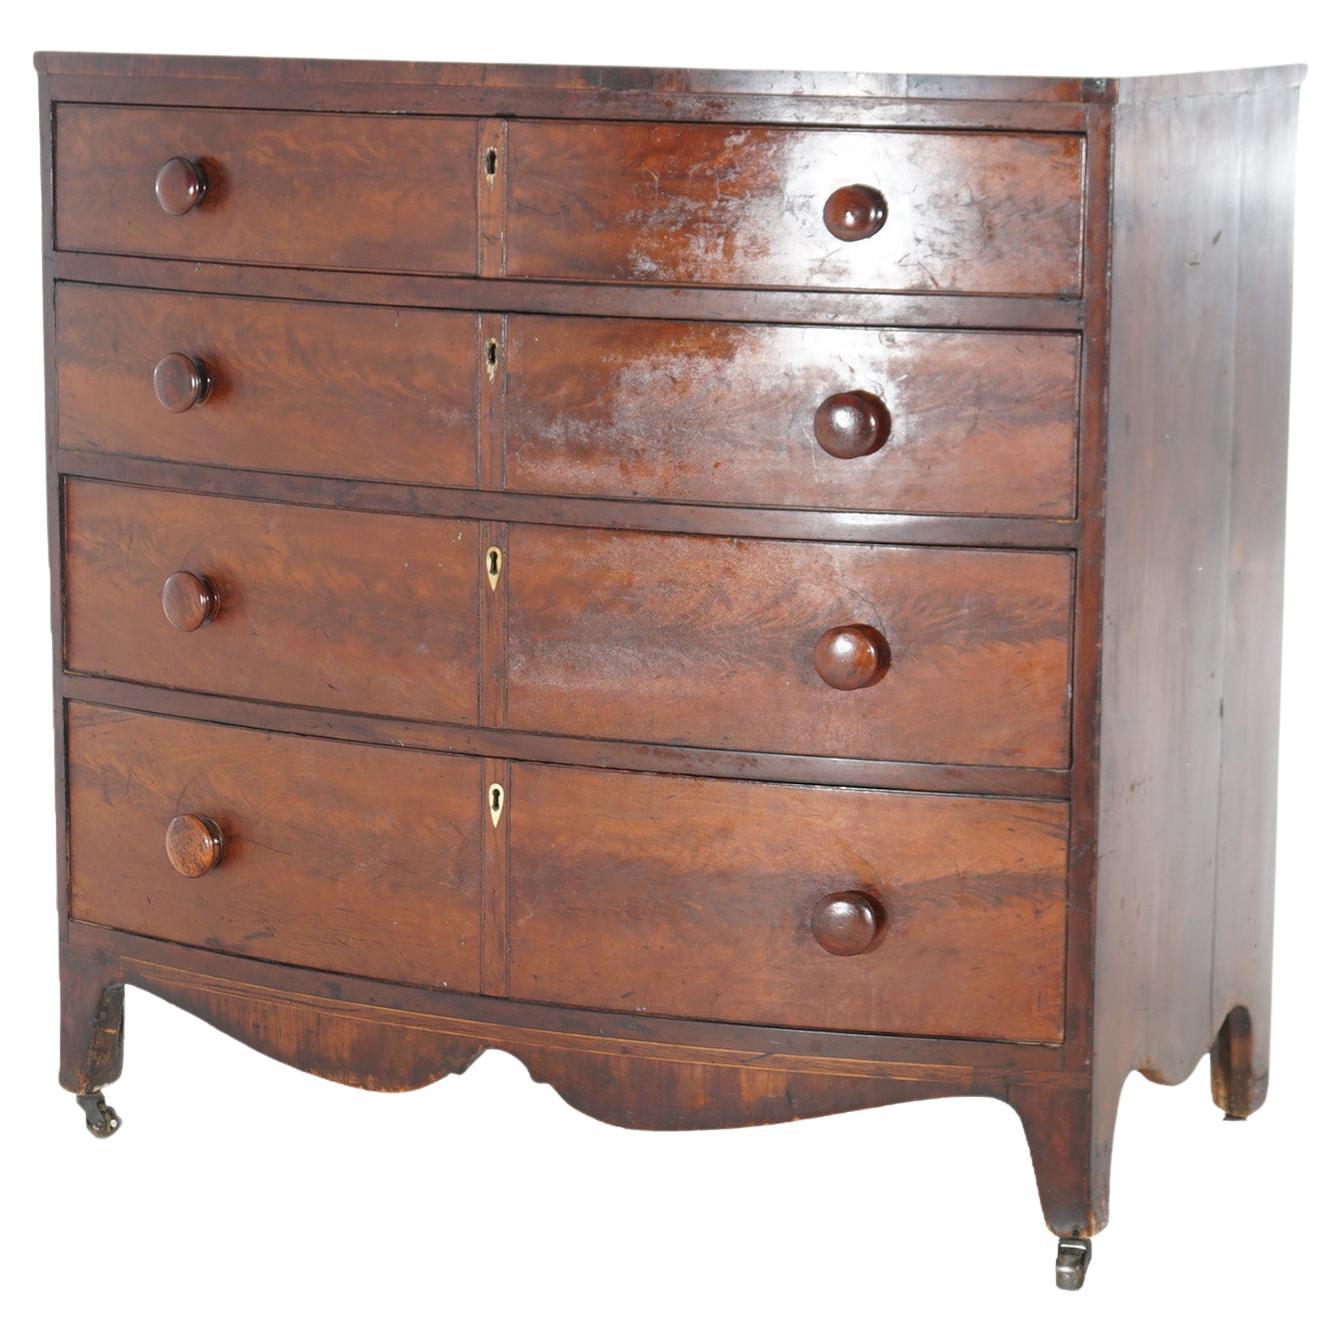 Antique Hepplewhite Flame Mahogany Bow Front Chest of Drawers c1830